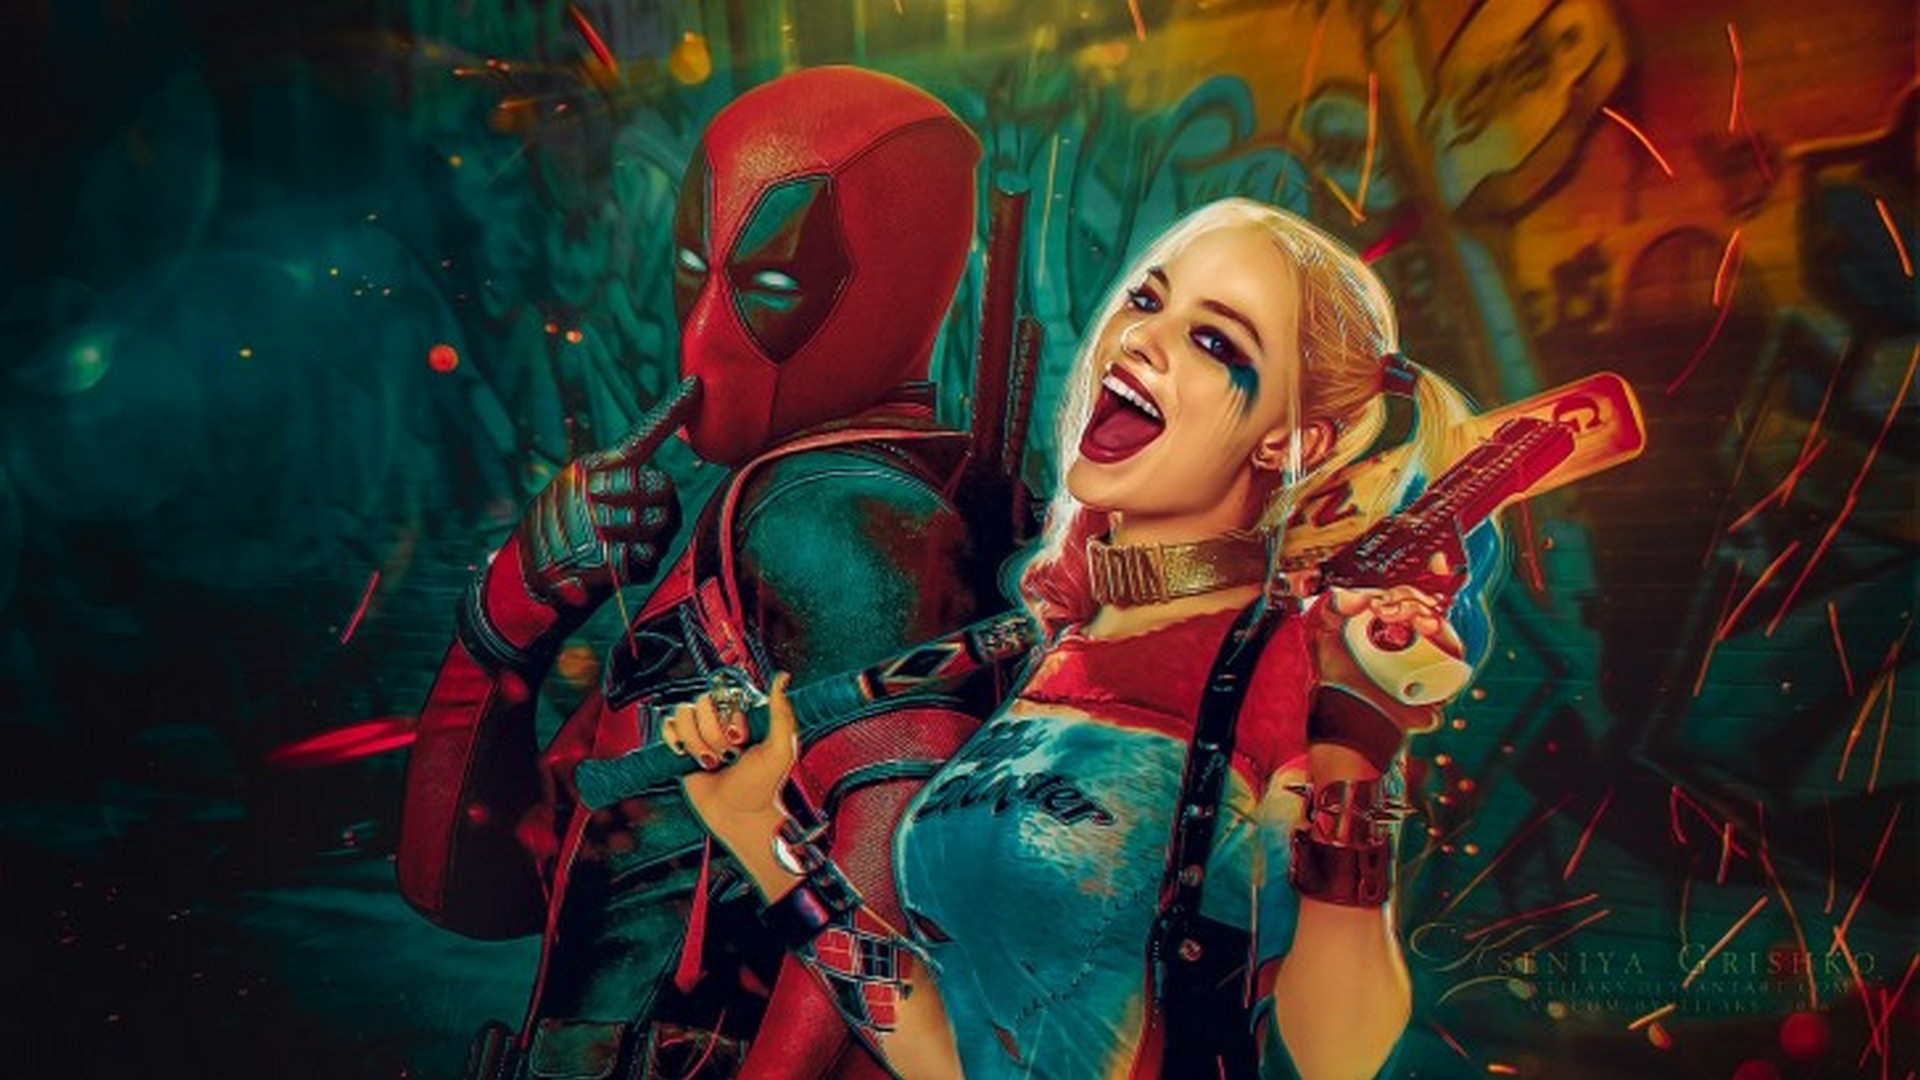 Harley Quinn Movie Wallpaper with image resolution 1920x1080 pixel. You can use this wallpaper as background for your desktop Computer Screensavers, Android or iPhone smartphones